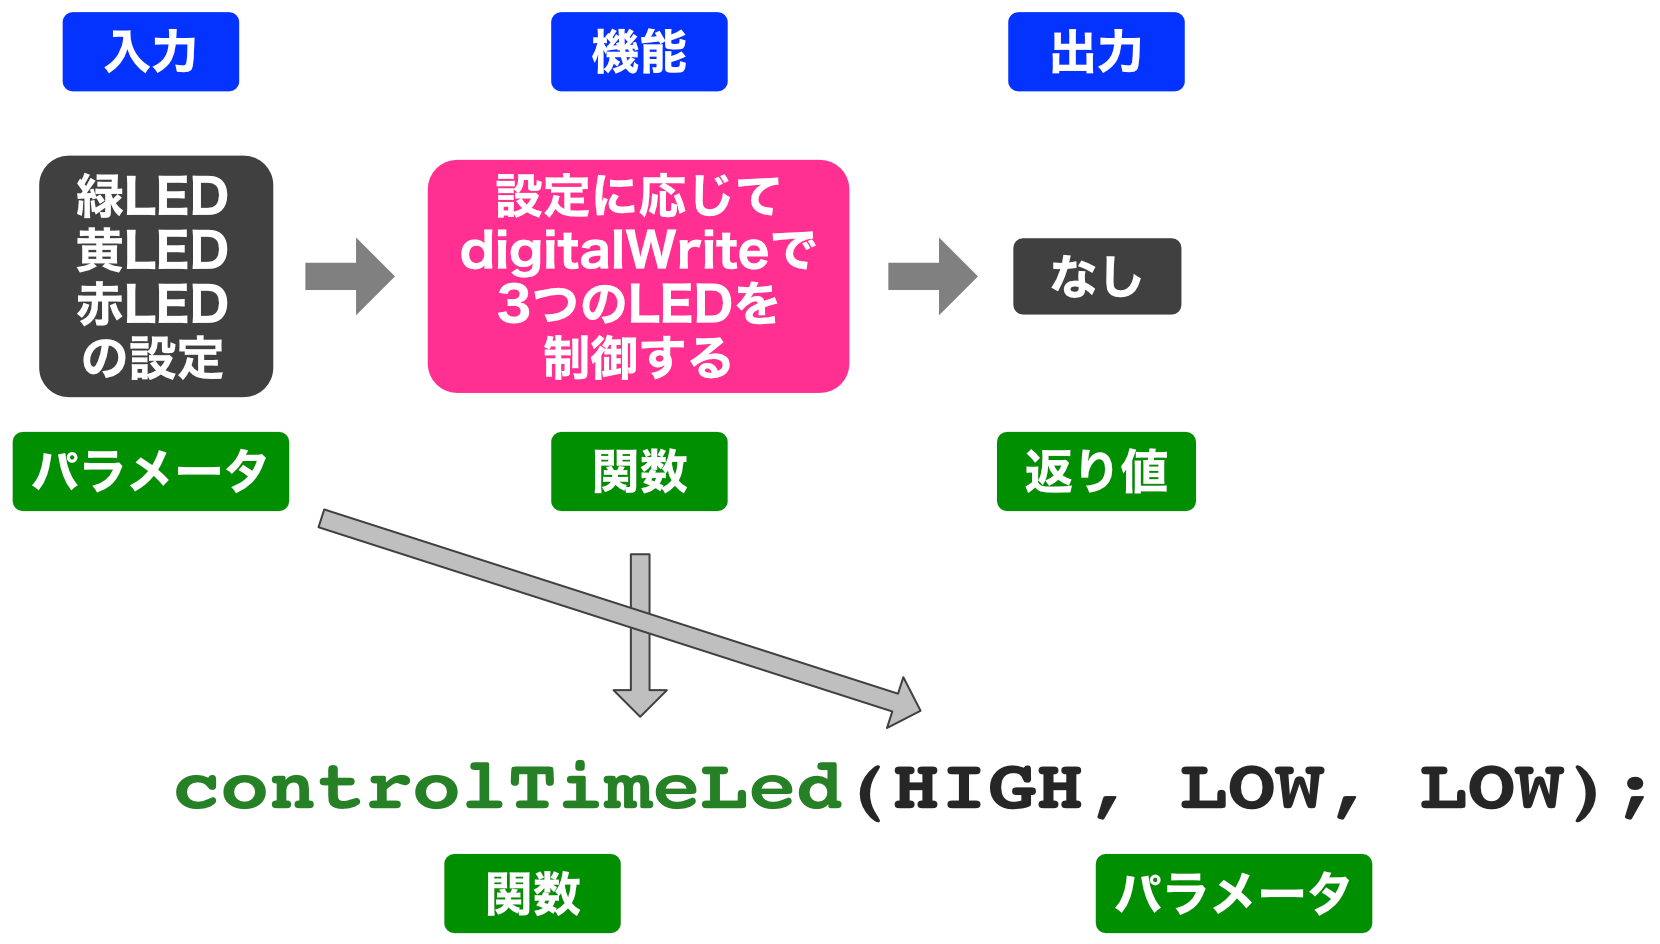 controlTimeLed関数